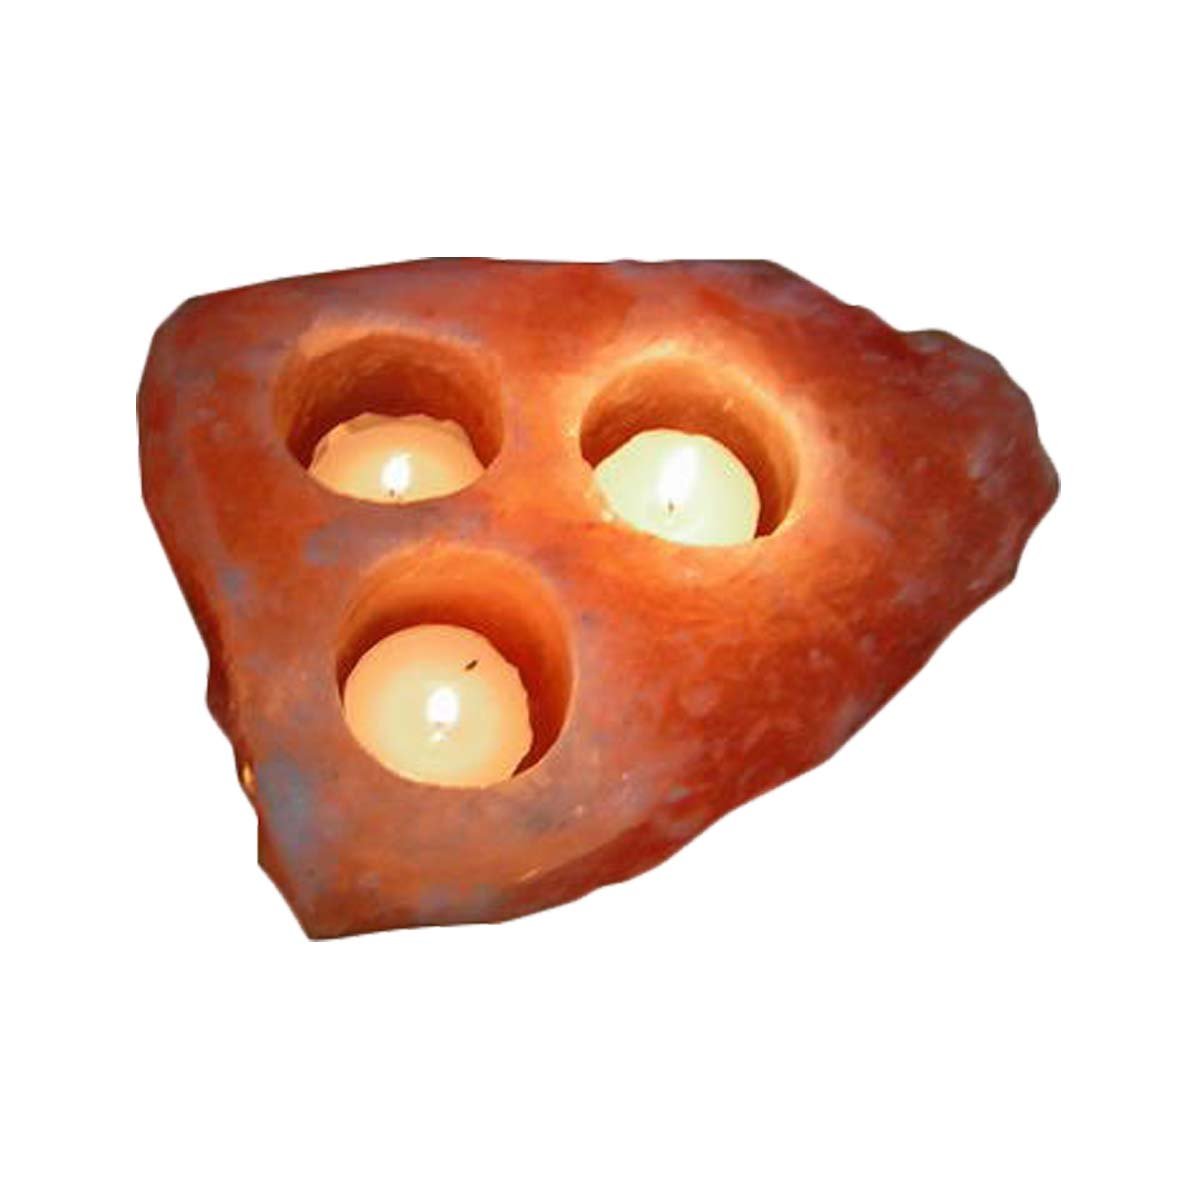 Natural Salt Candle Holder for Three Candles